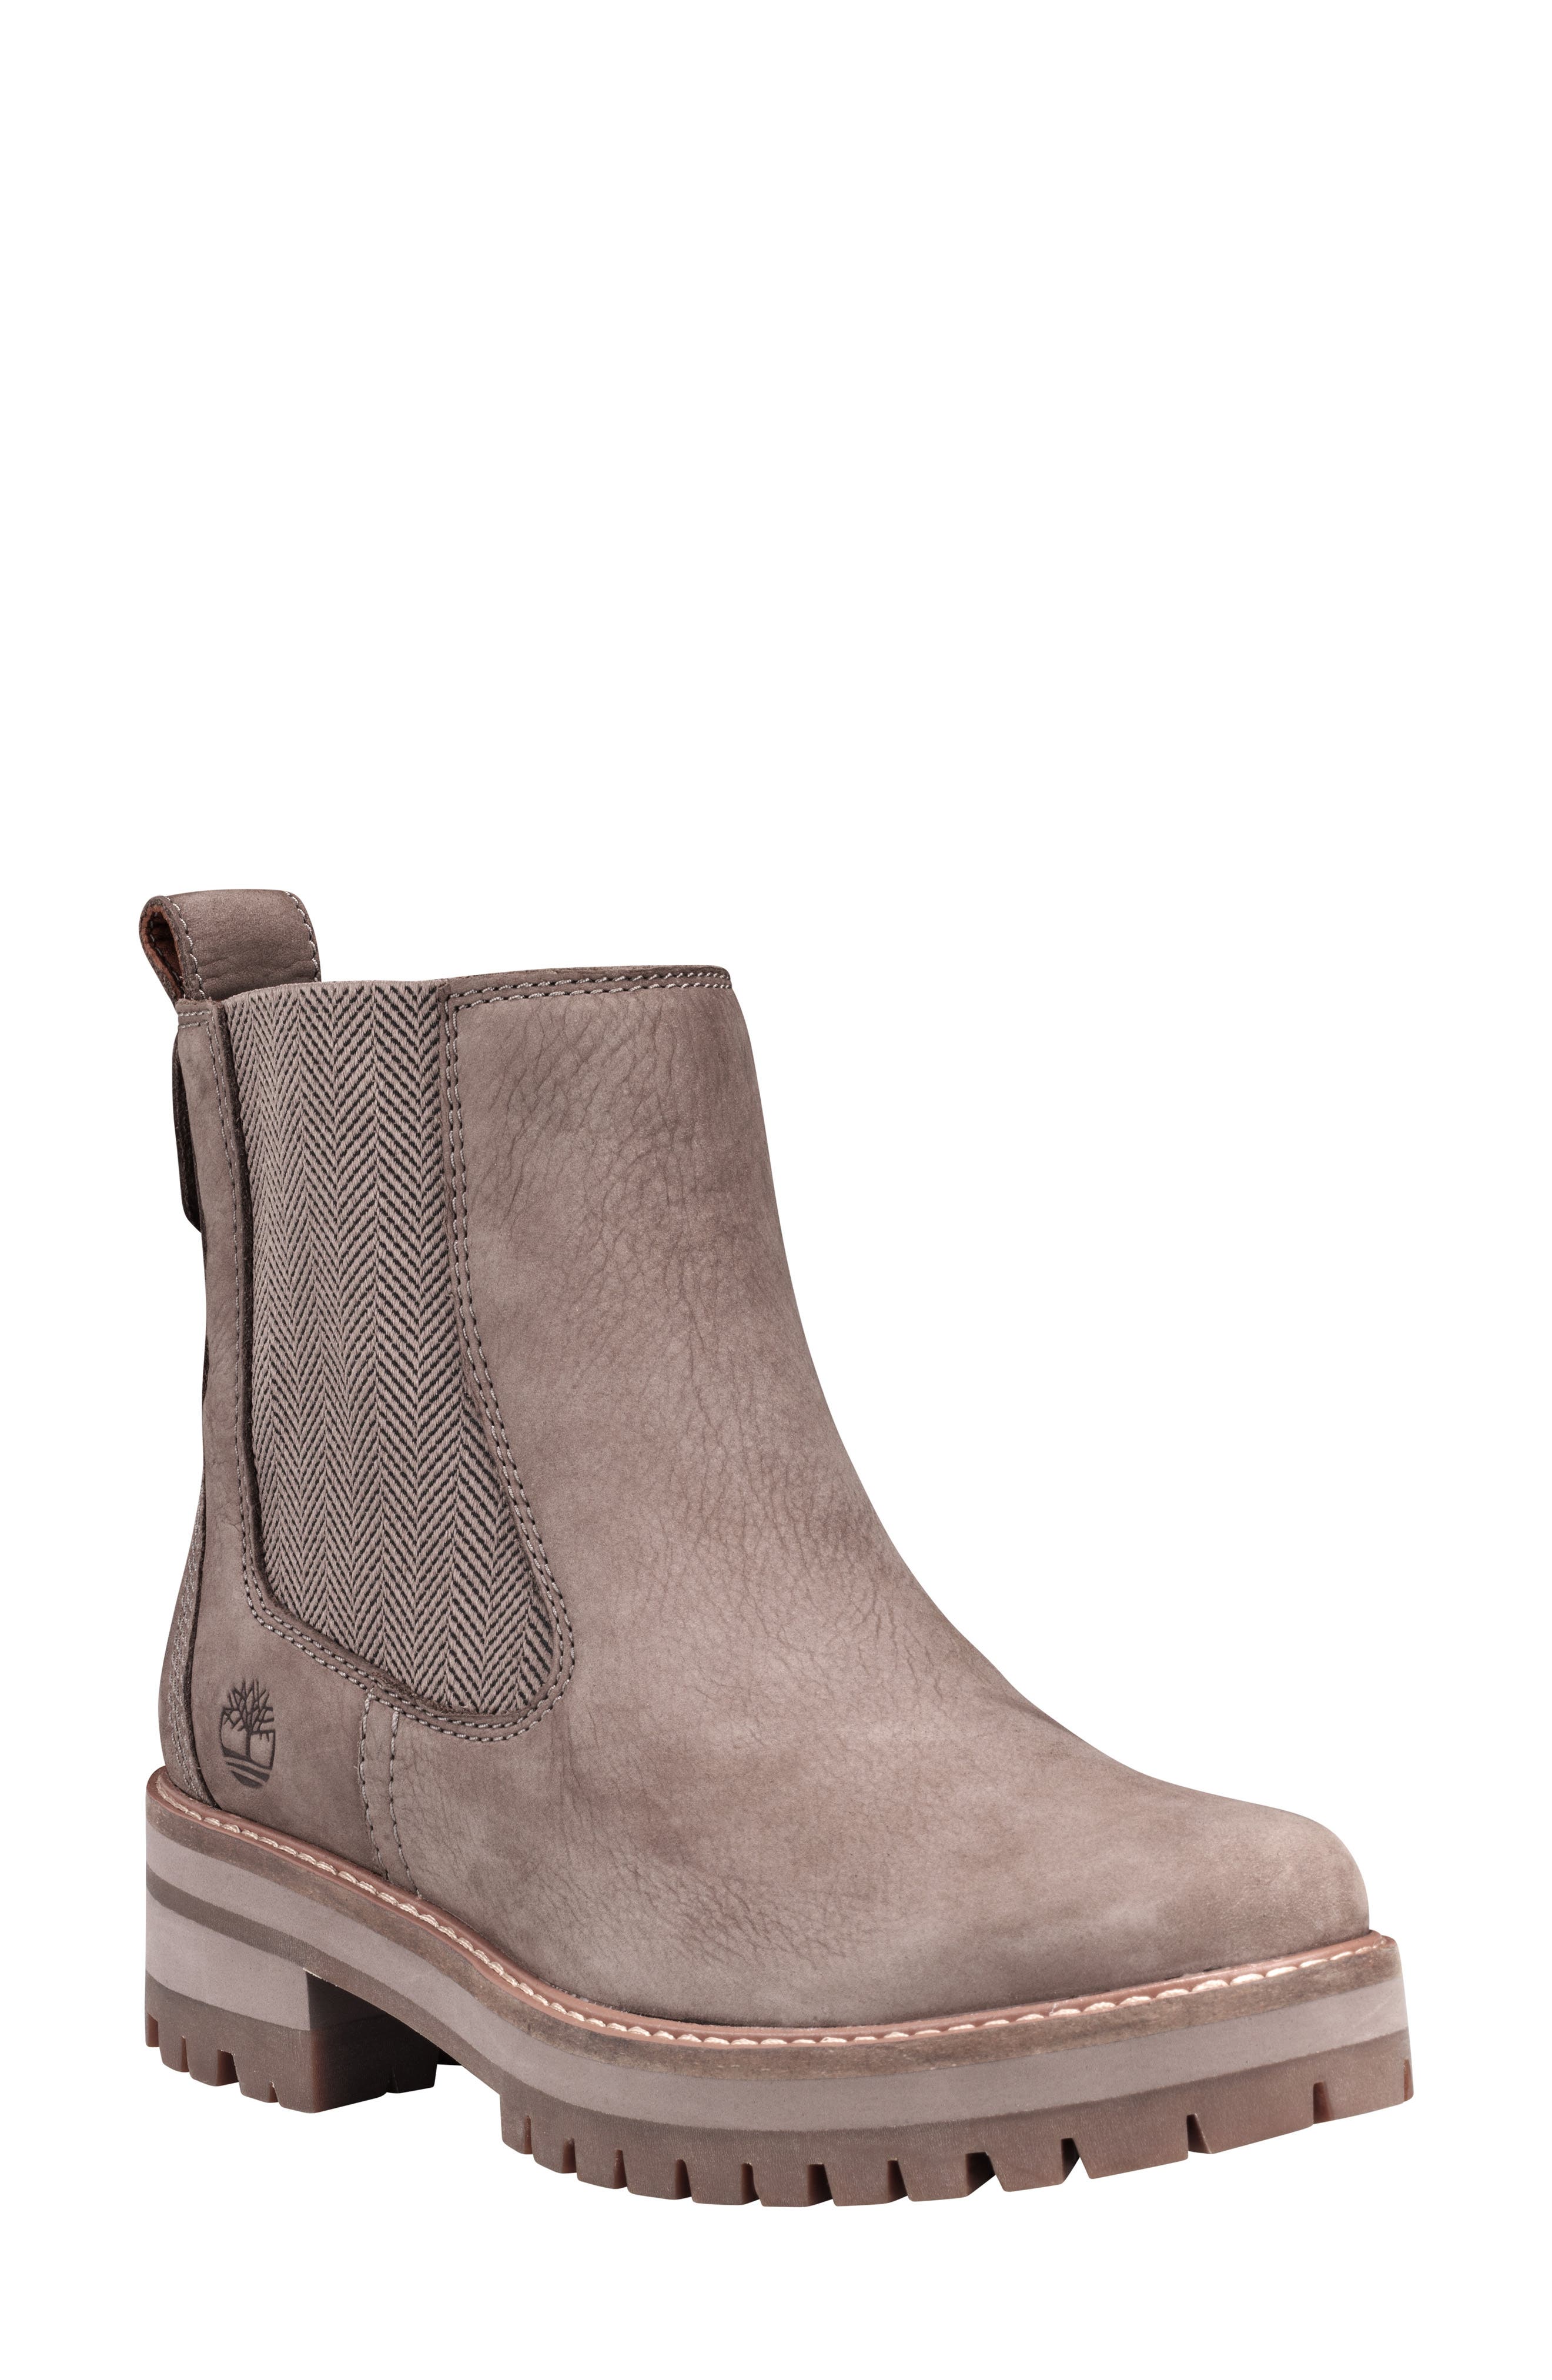 Women's Timberland Boots | Nordstrom